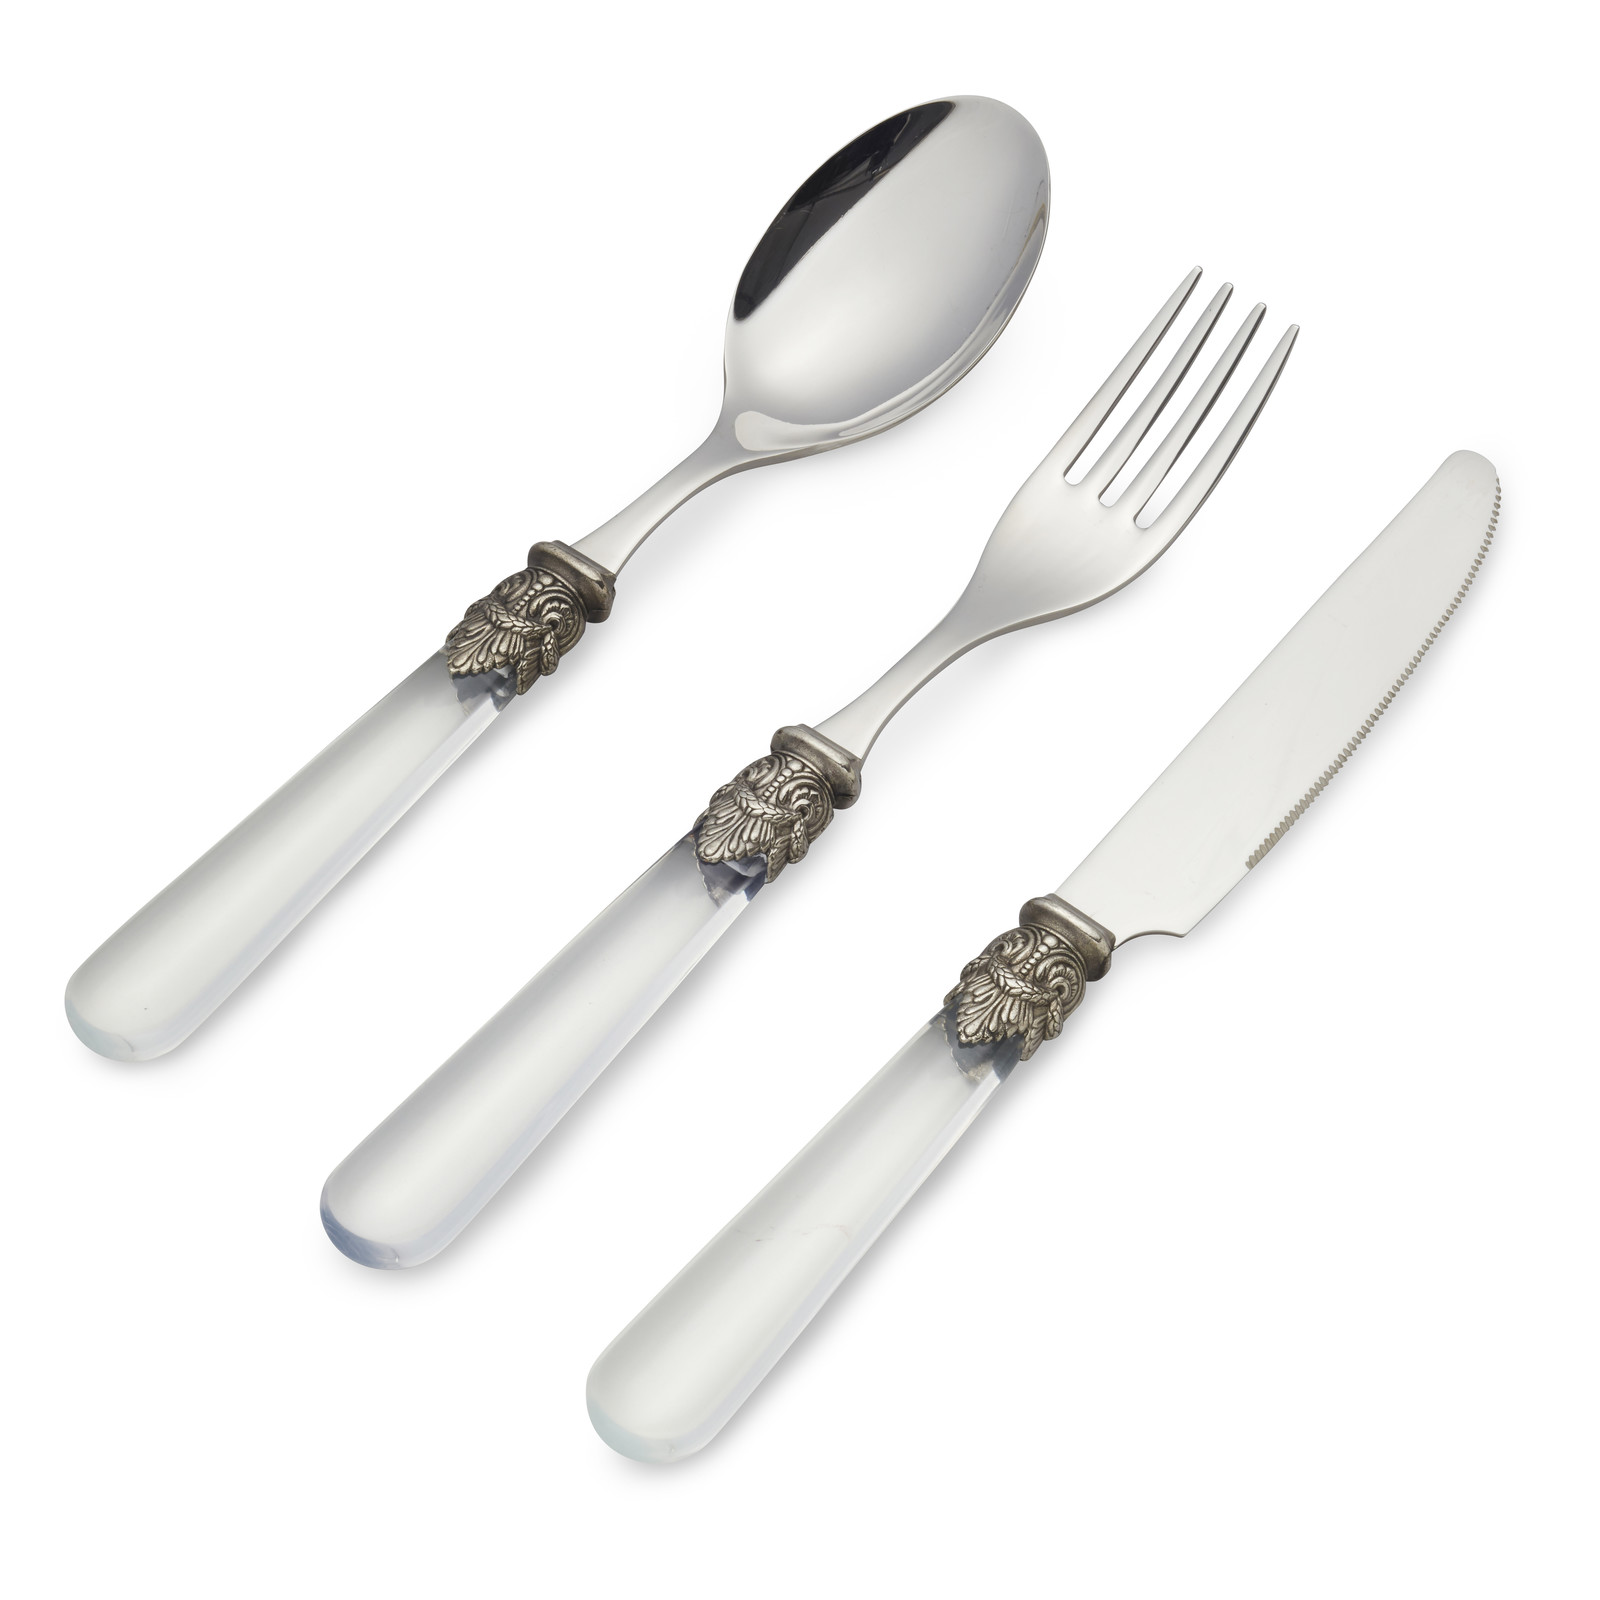 Breakfast Cutlery Set, Transparent, 3 pieces, 1 person